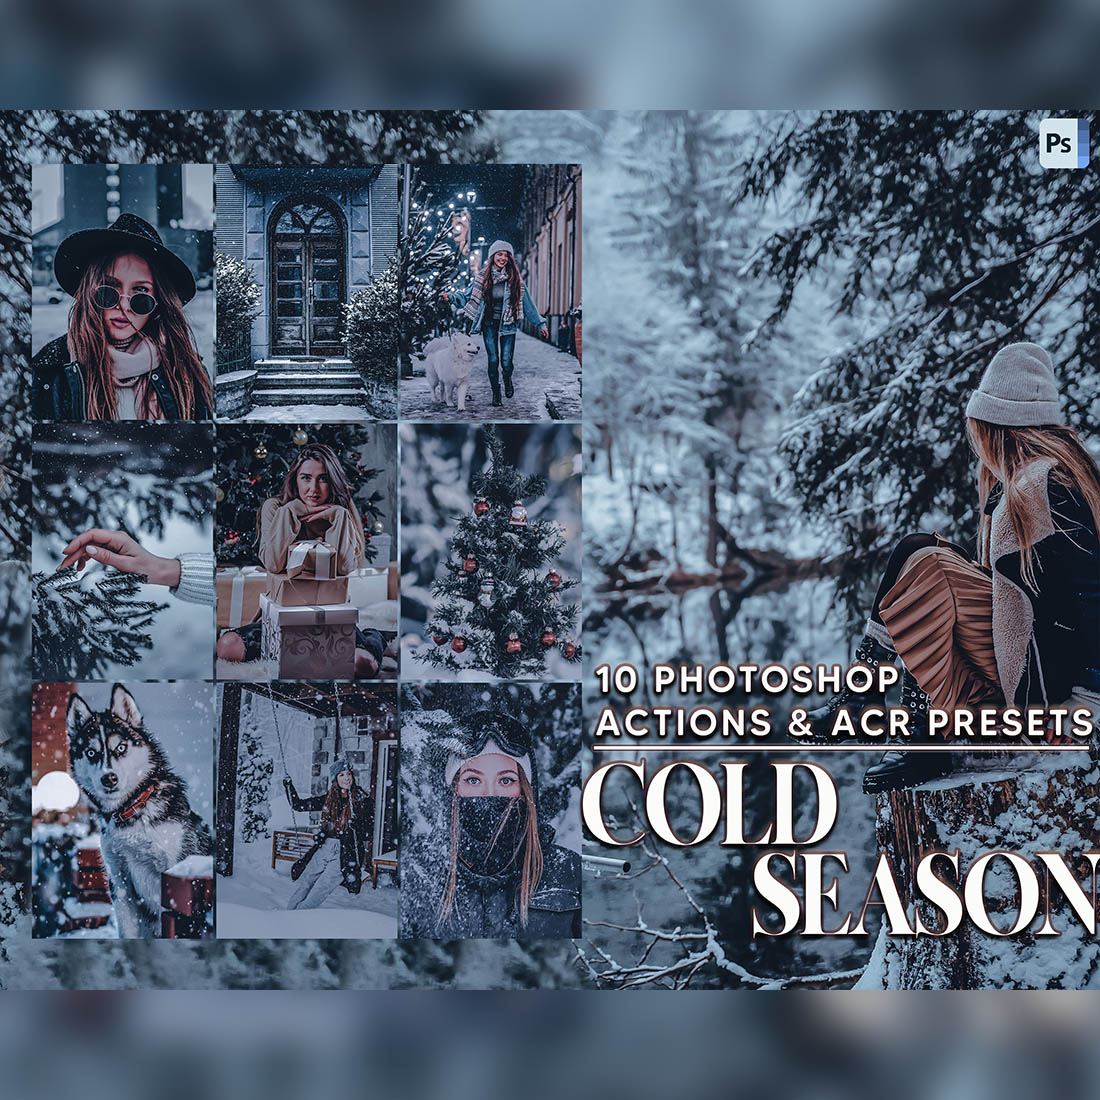 10 Photoshop Actions, Cold Season Ps Action, Blue ACR Preset, Moody Ps Filter, Snow Portrait And Lifestyle Theme For Instagram, Blogger cover image.